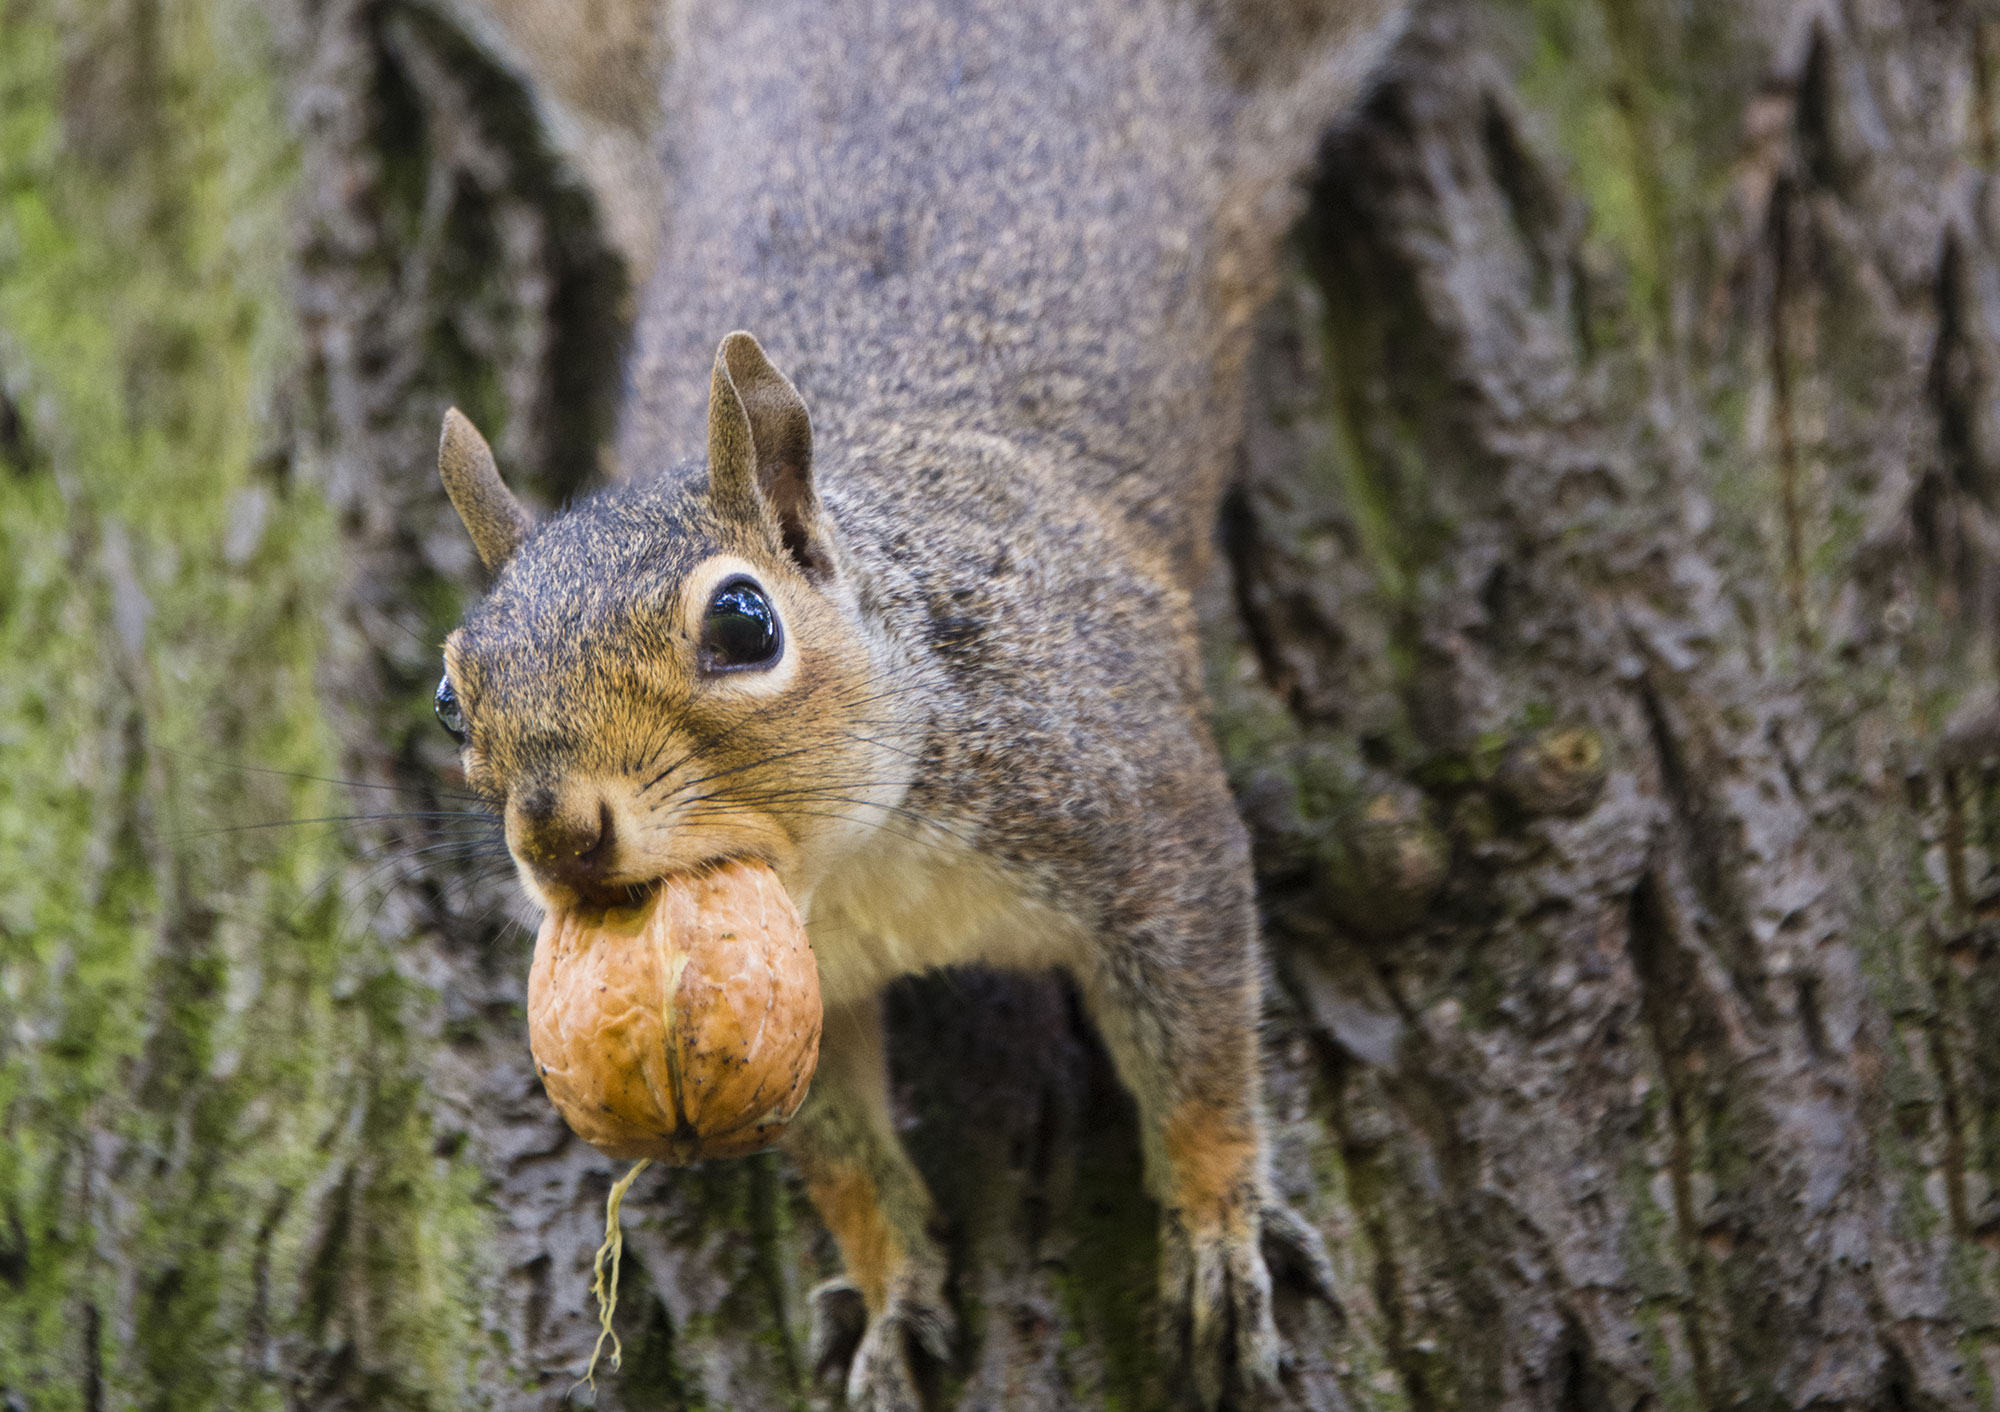 A squirrel climbing a tree with a nut in its mouth.